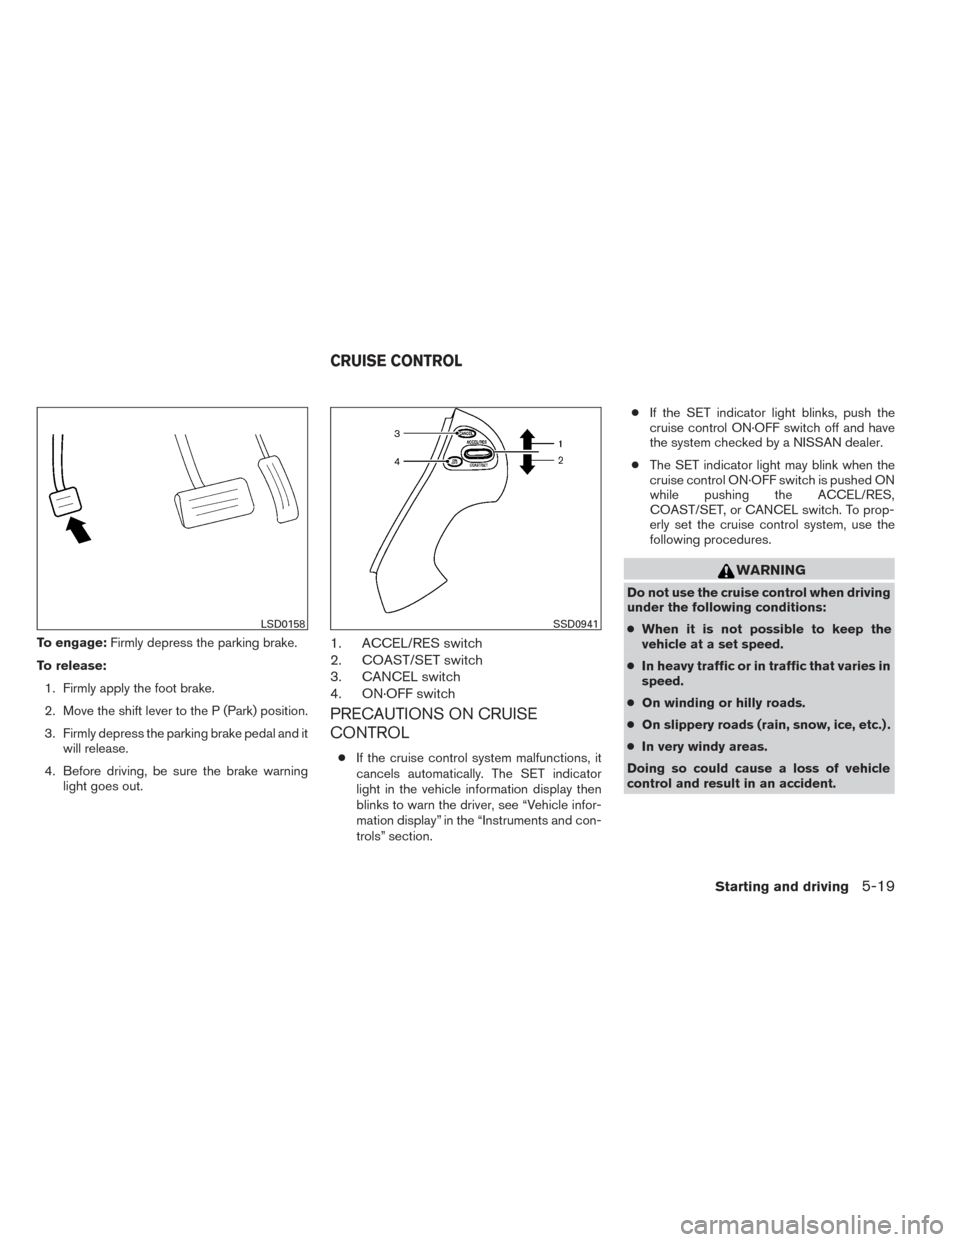 NISSAN PATHFINDER 2014 R52 / 4.G Owners Manual To engage:Firmly depress the parking brake.
To release: 1. Firmly apply the foot brake.
2. Move the shift lever to the P (Park) position.
3. Firmly depress the parking brake pedal and it will release.